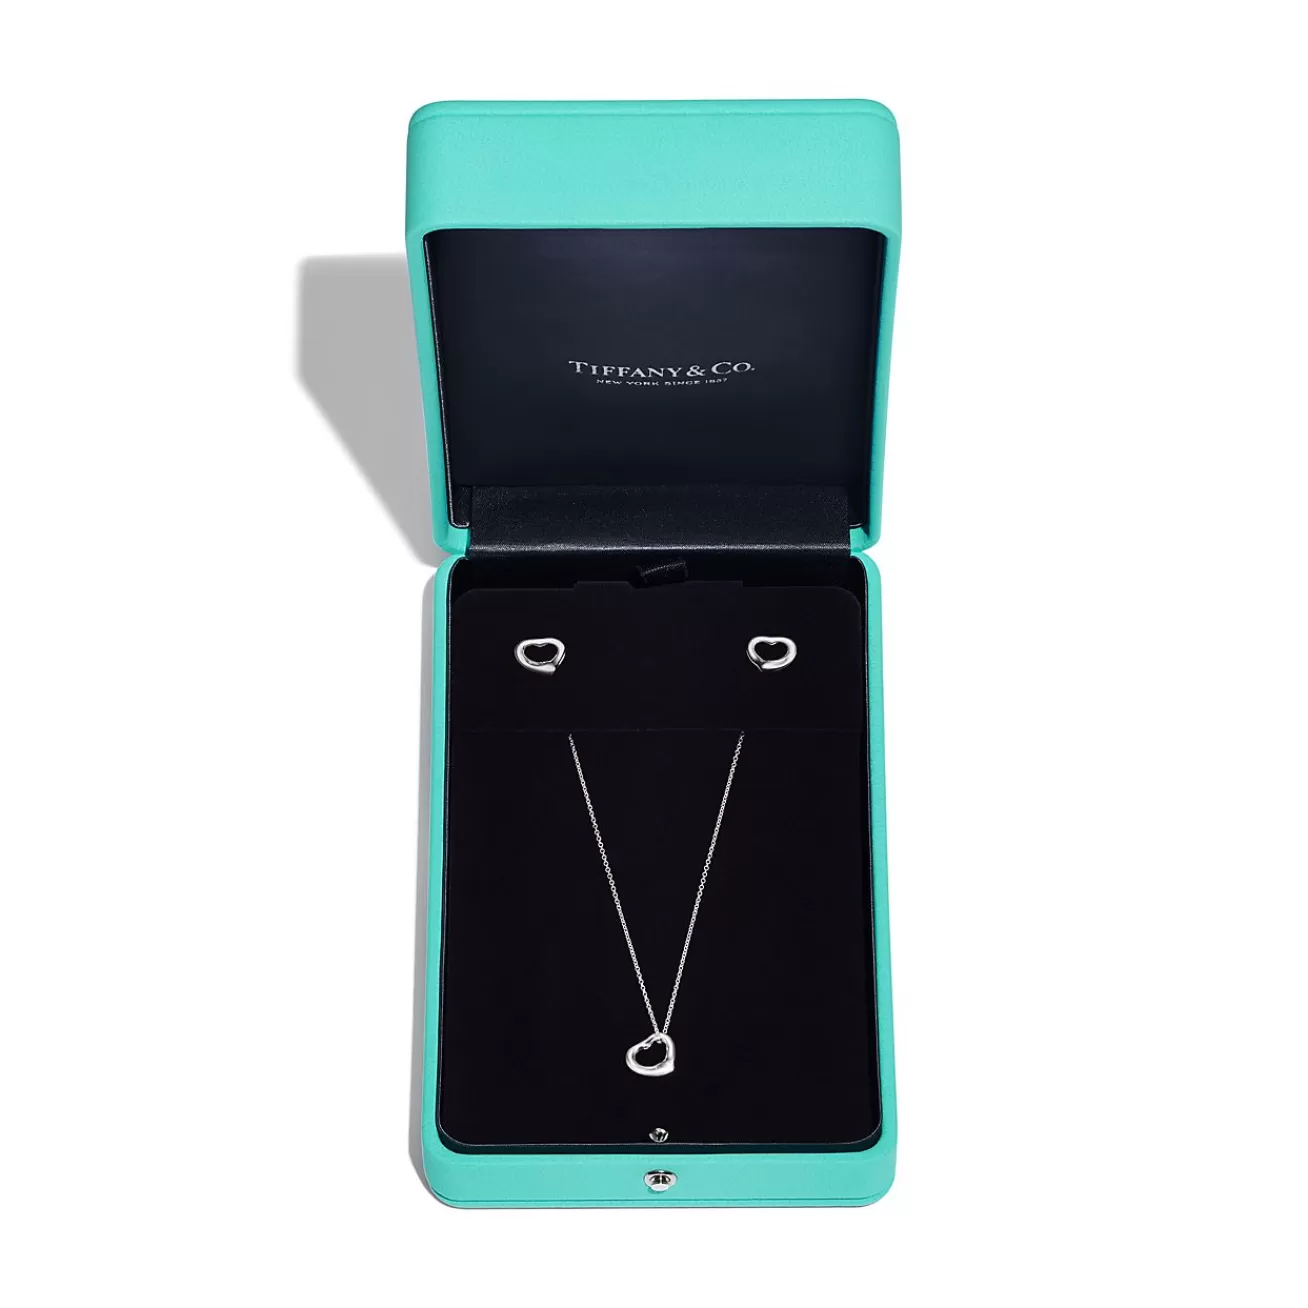 Tiffany & Co. Elsa Peretti® Open Heart Pendant and Earrings Set in Sterling Silver | ^ Gifts for Her | Her